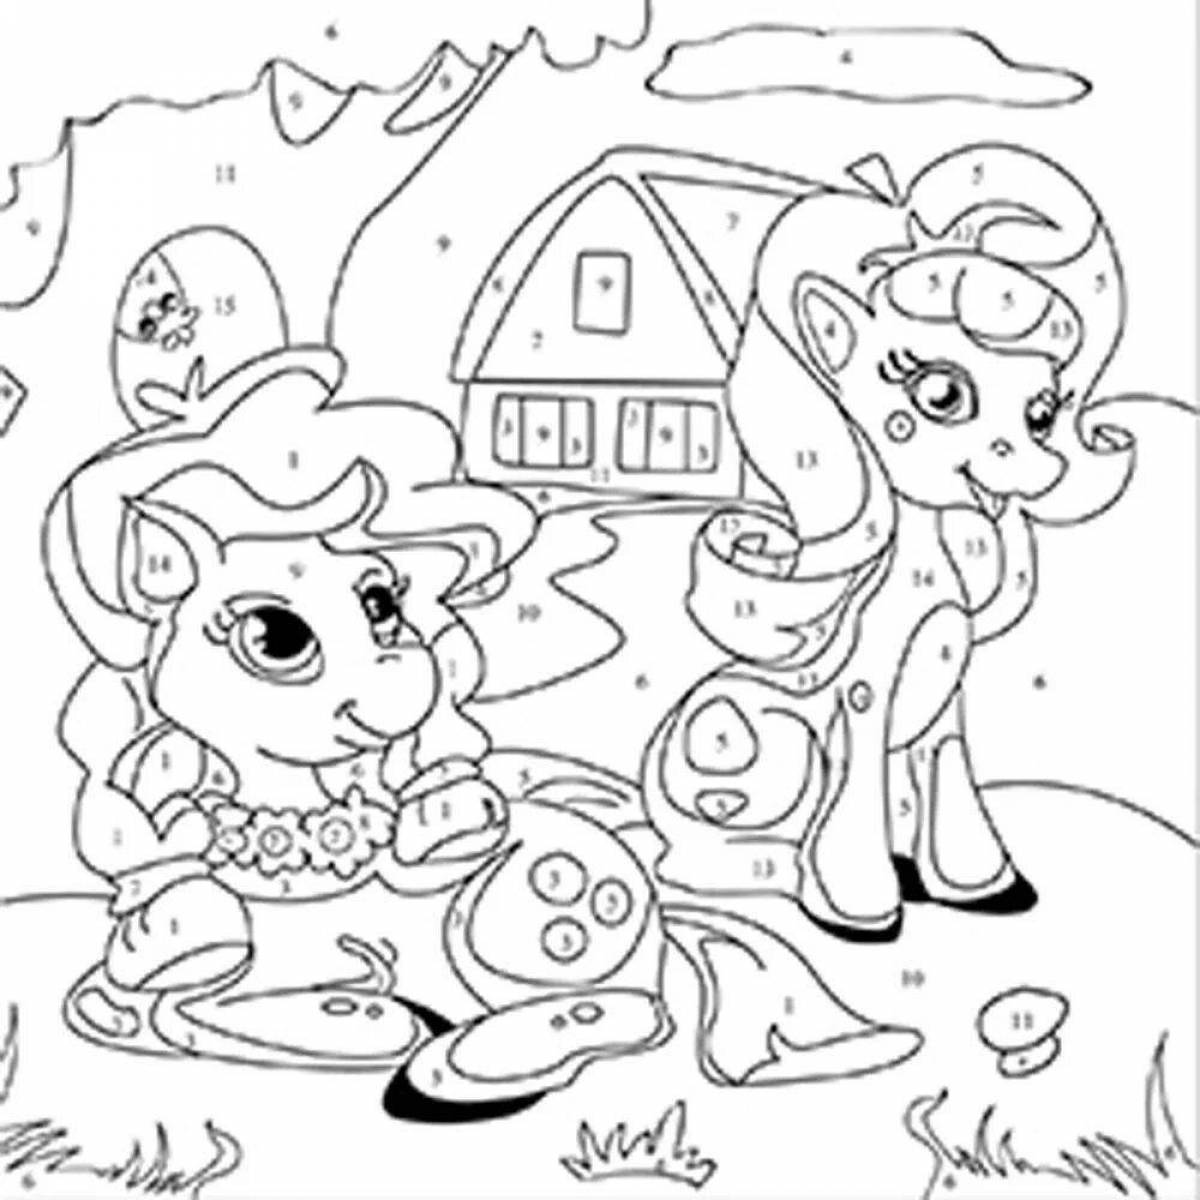 Coloring nice pony by numbers